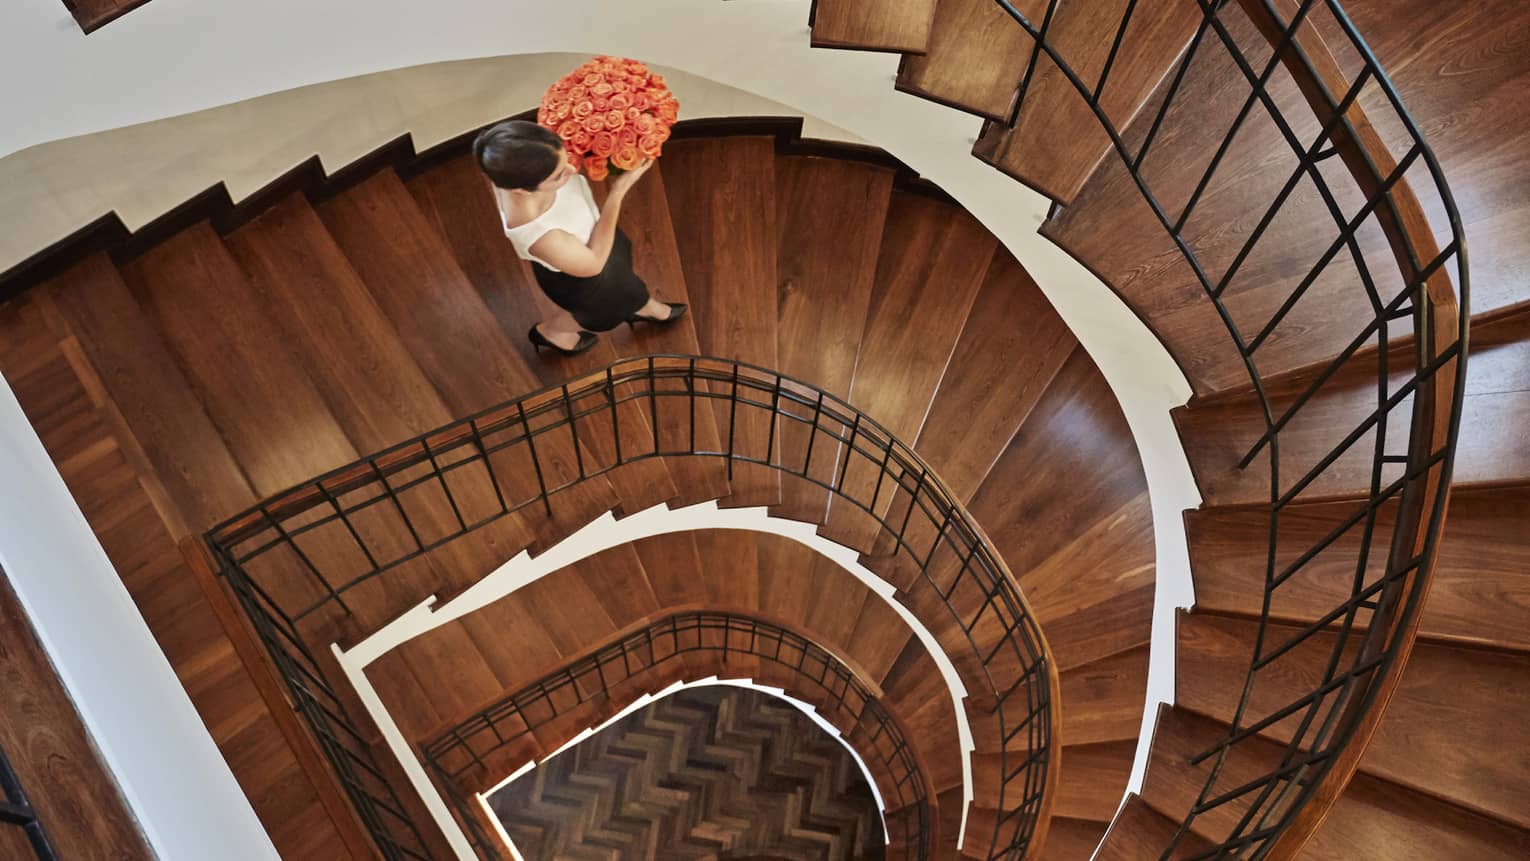 Aerial view of woman holding pink rose flower arrangement walking down wood spiral staircase